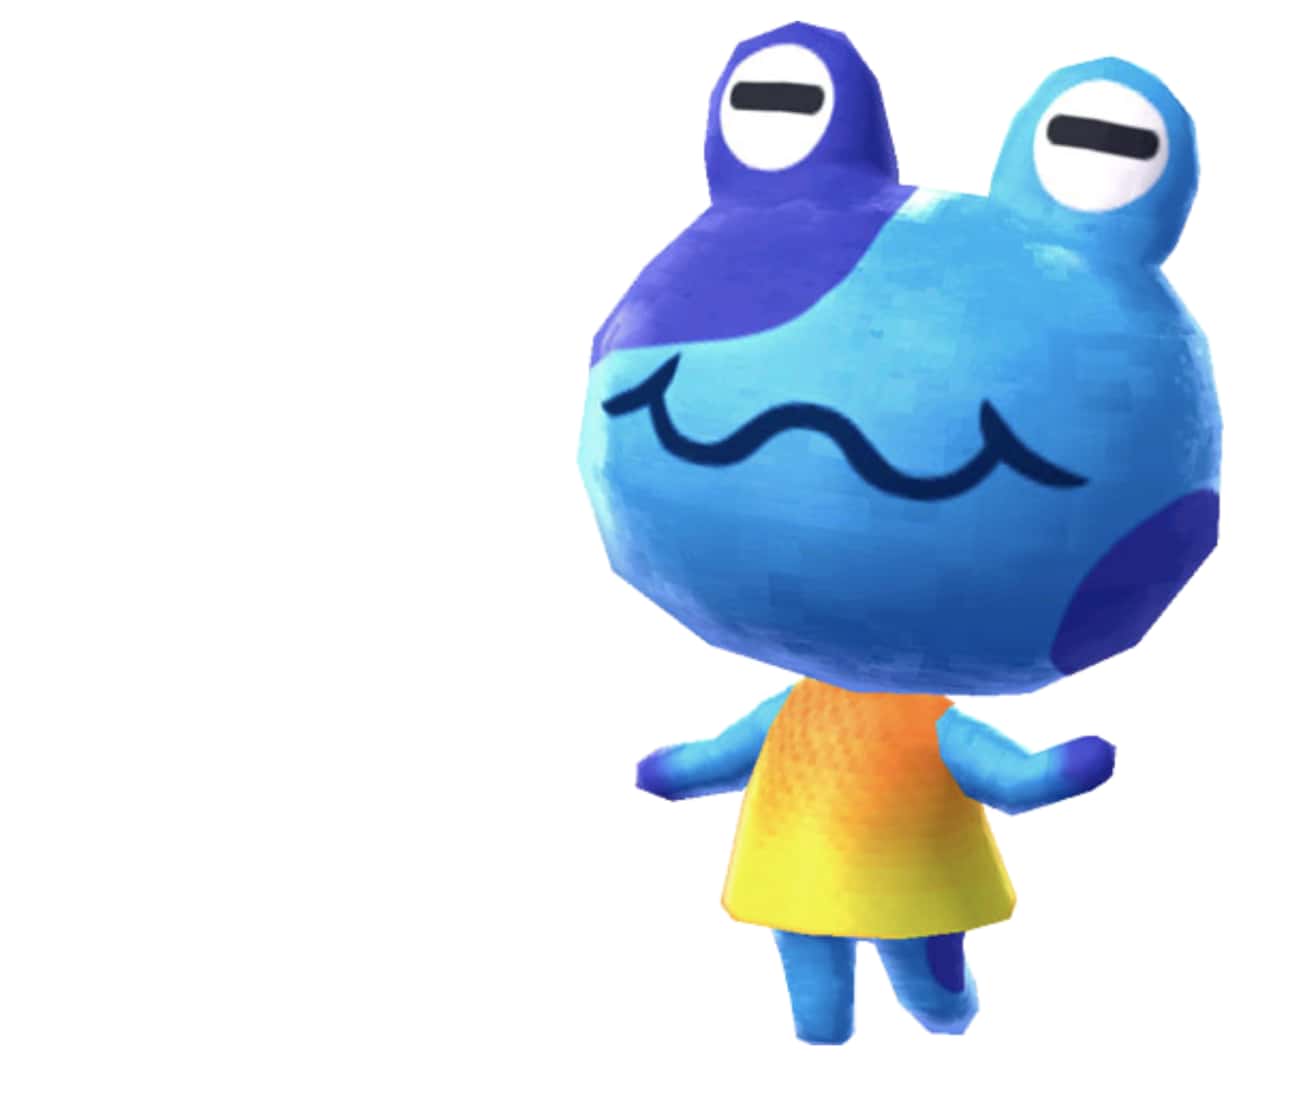 Ranking The 18 Best Frog Villagers In 'Animal Crossing'